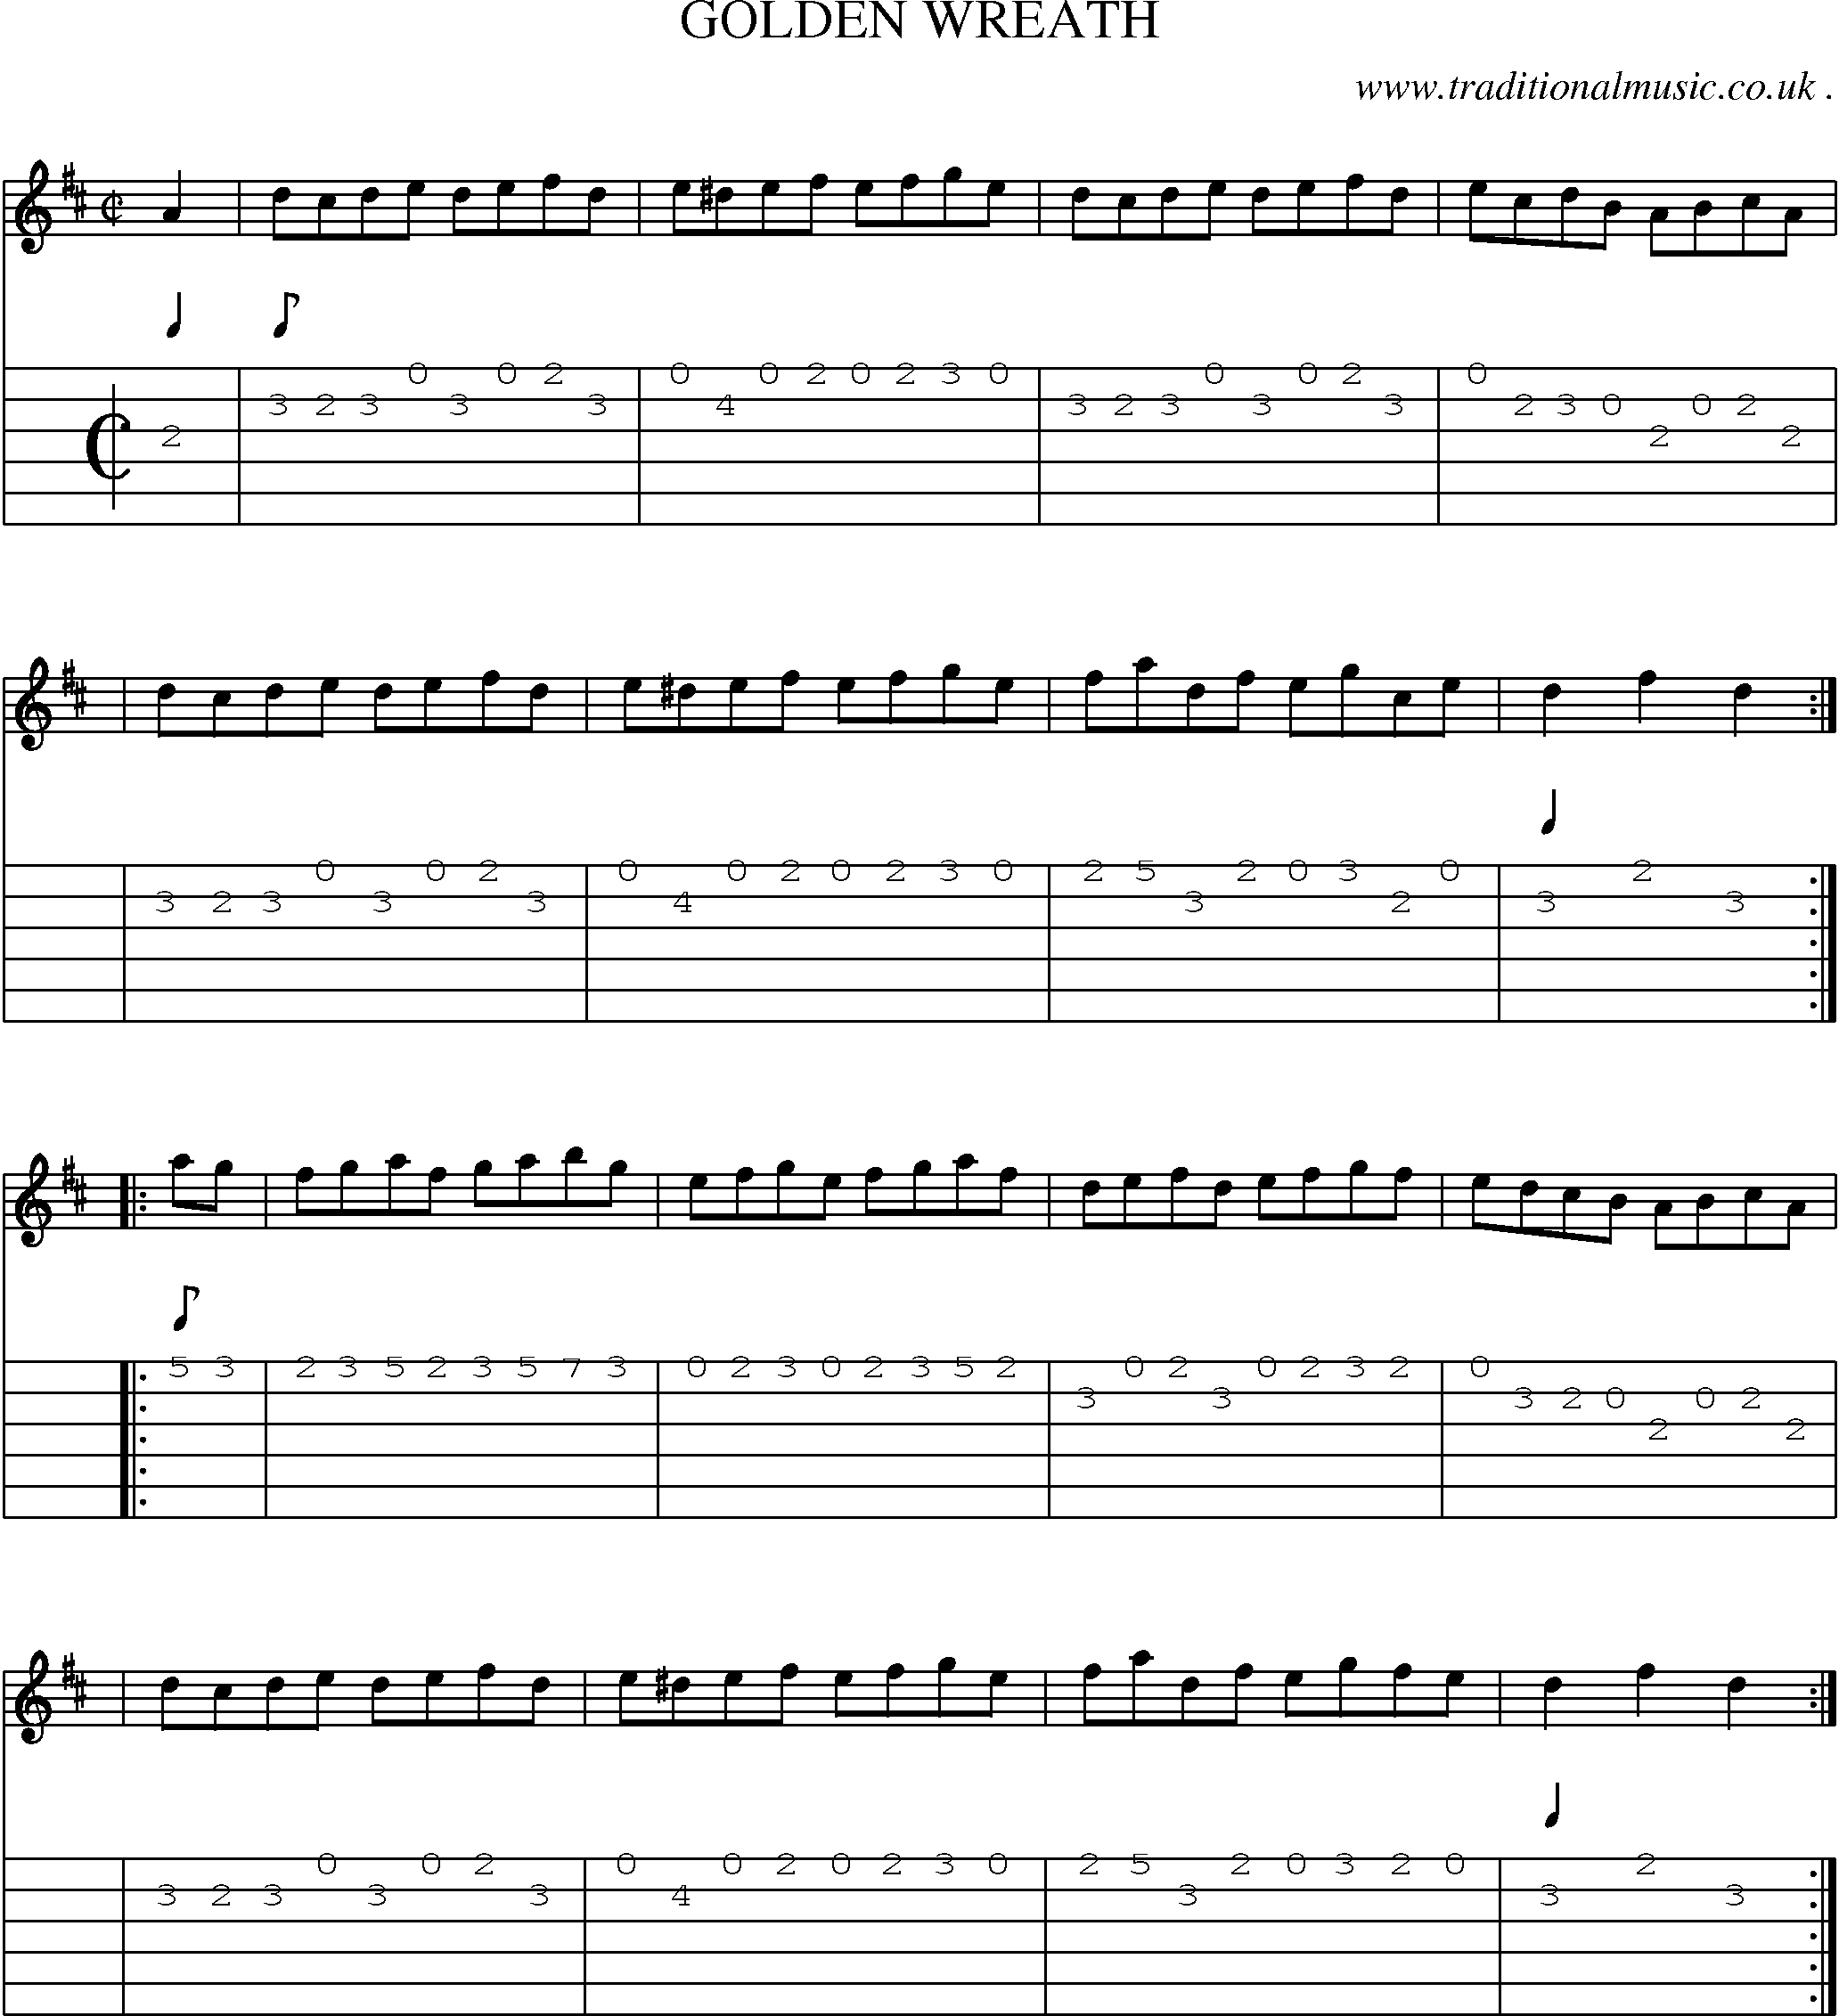 Sheet-Music and Guitar Tabs for Golden Wreath